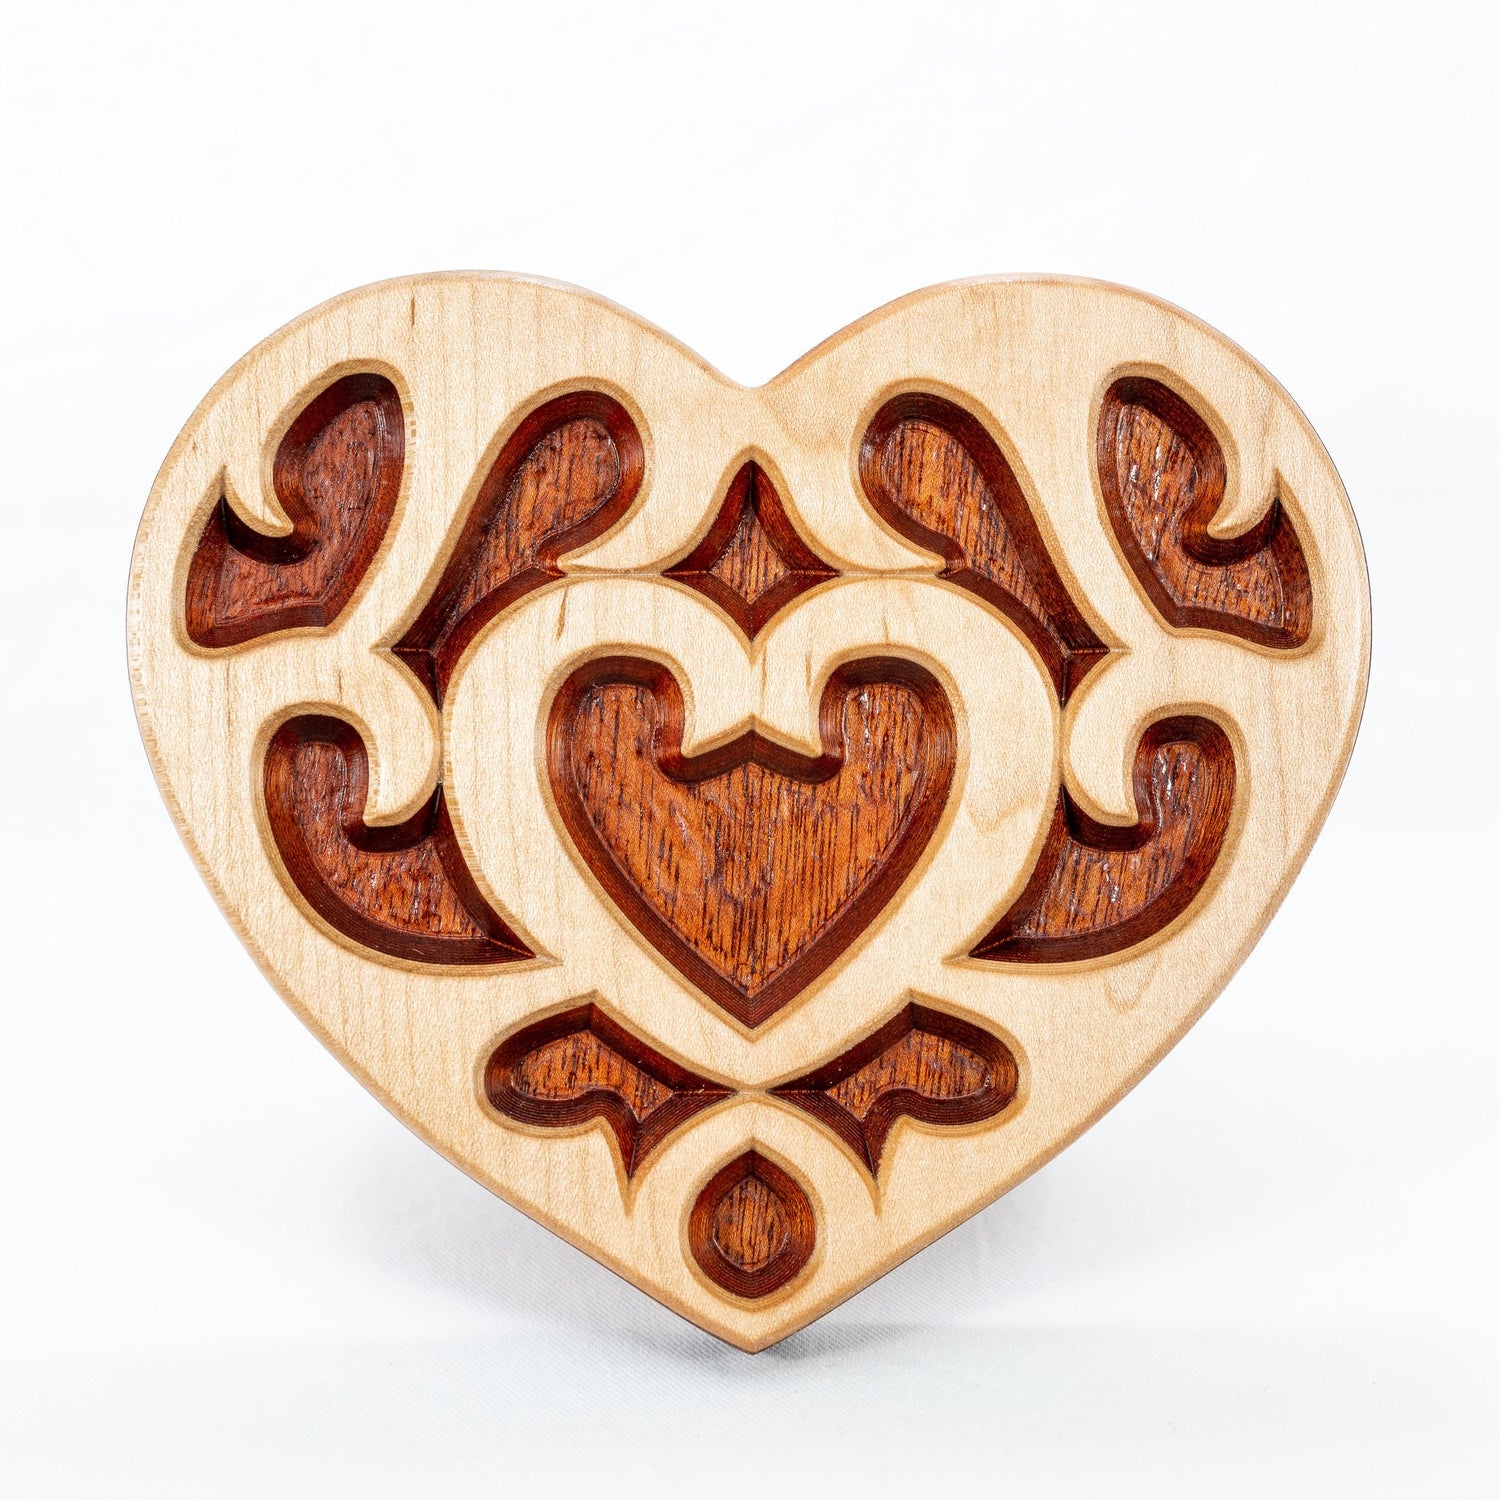 Handmade solid Maple and Bloodwood wood carved trinket tray heart piece from Zelda Twilight Princess